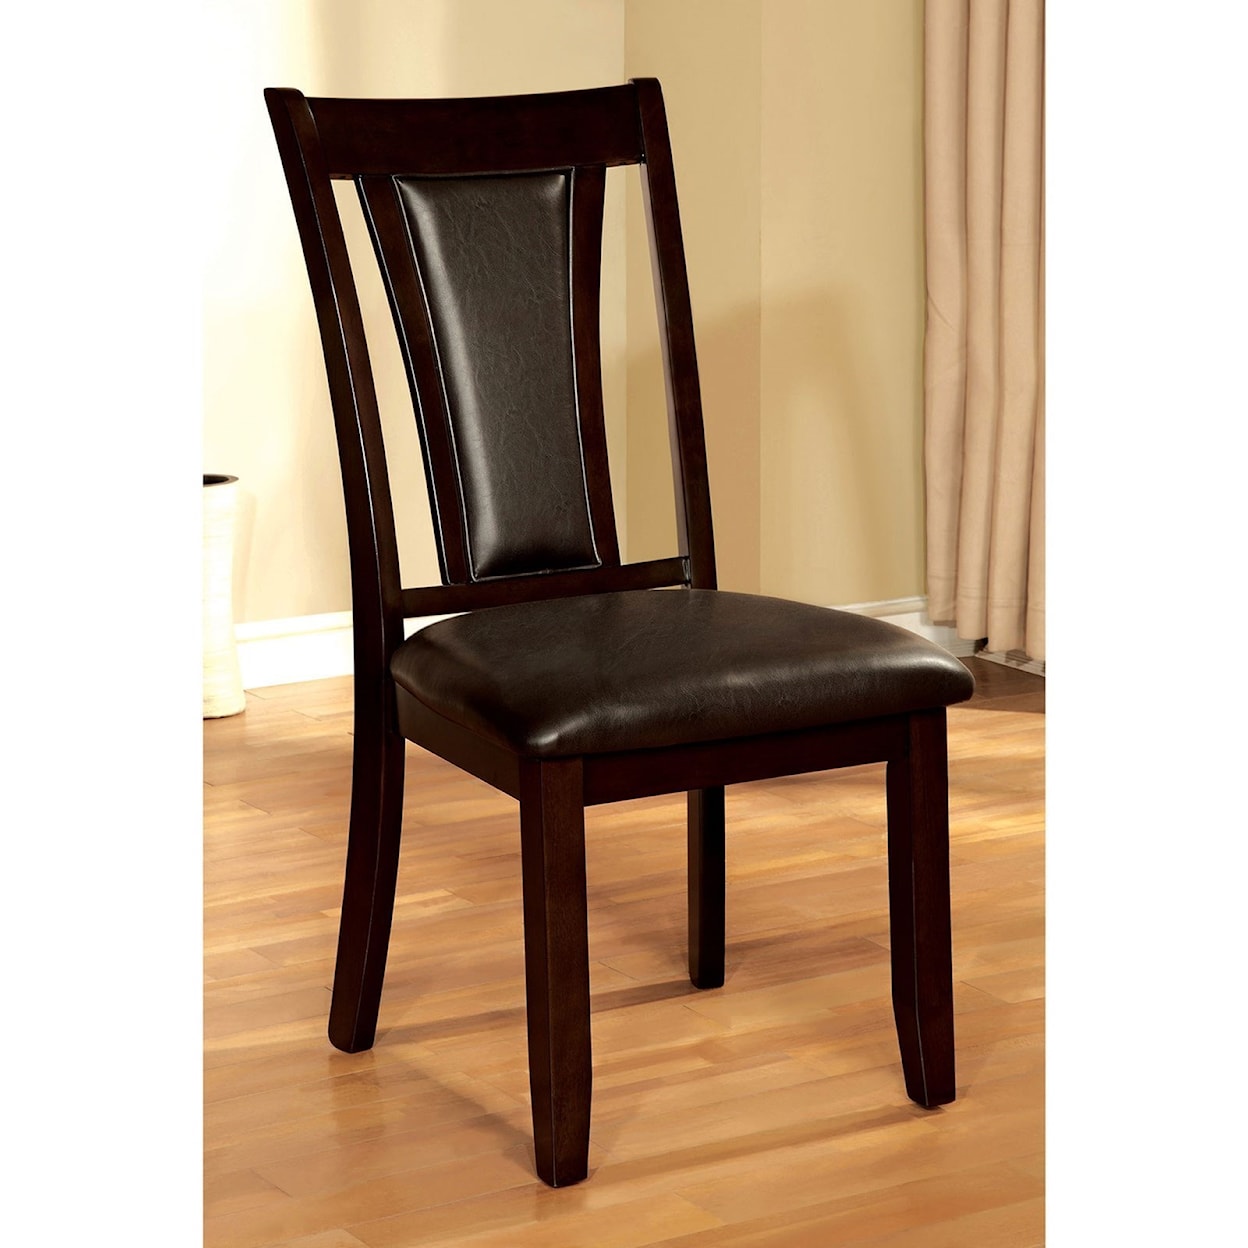 Furniture of America Brent Side Chair